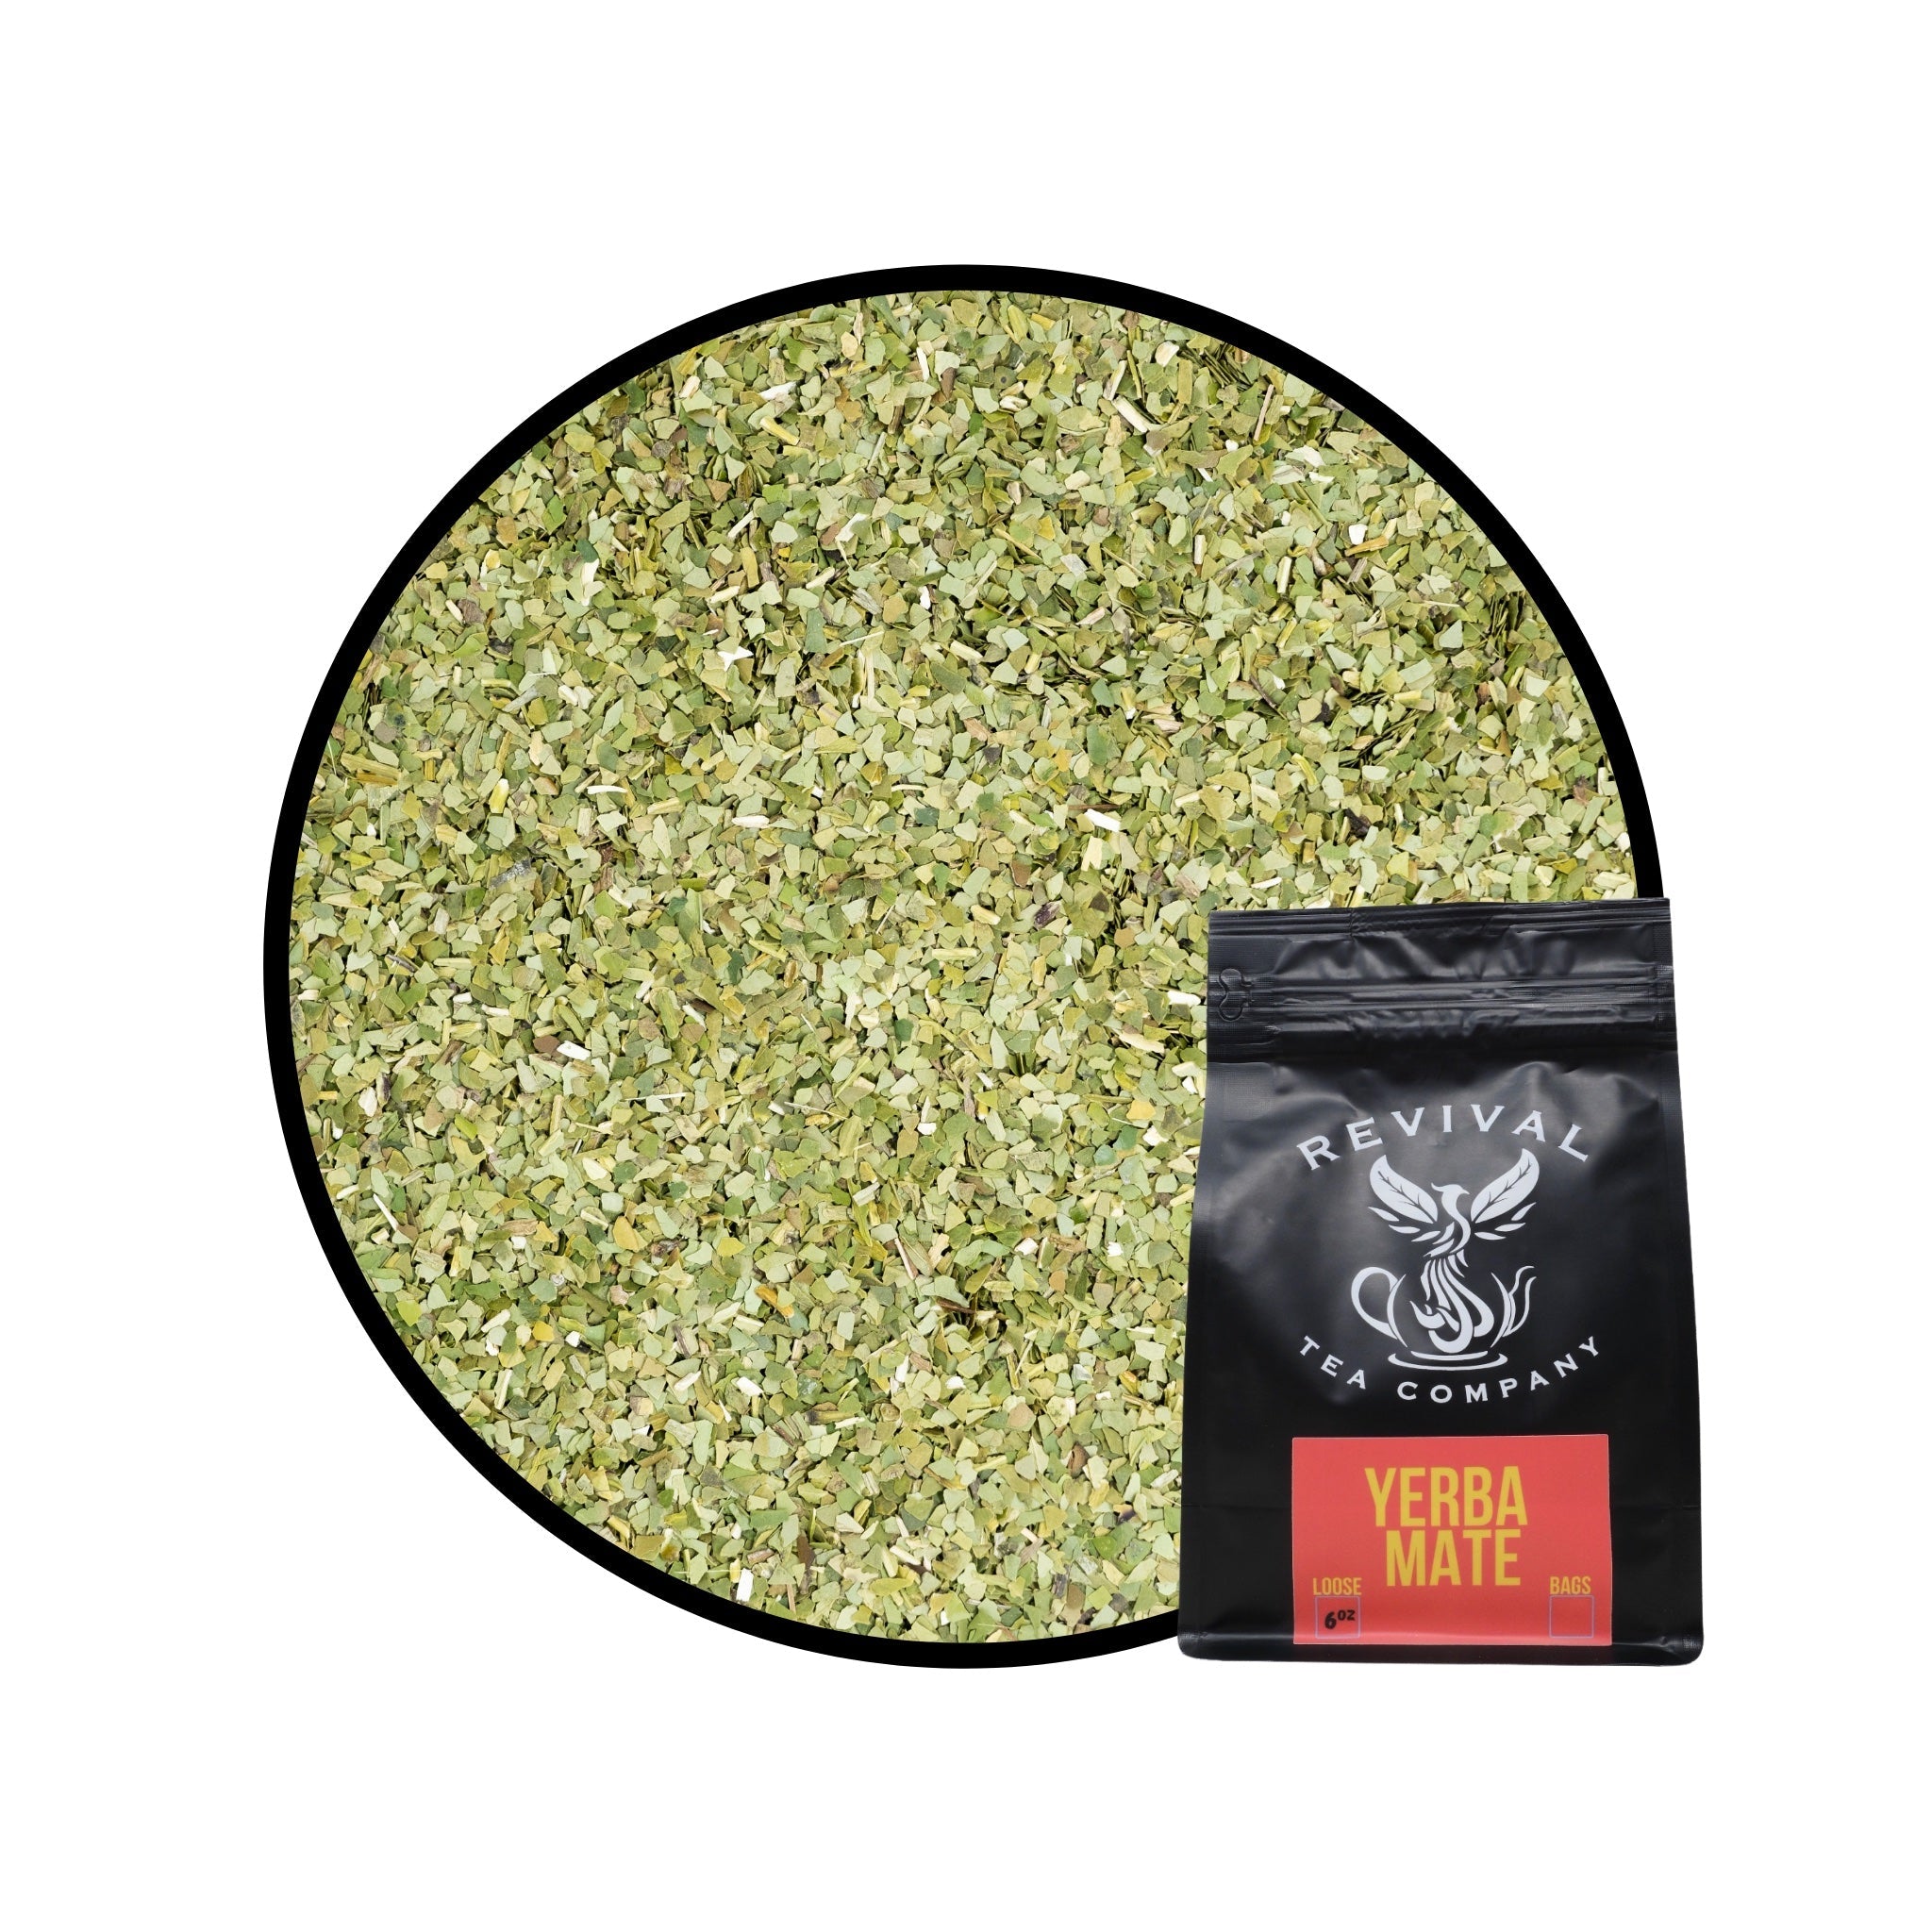 Types of yerba mate and how to choose the best one